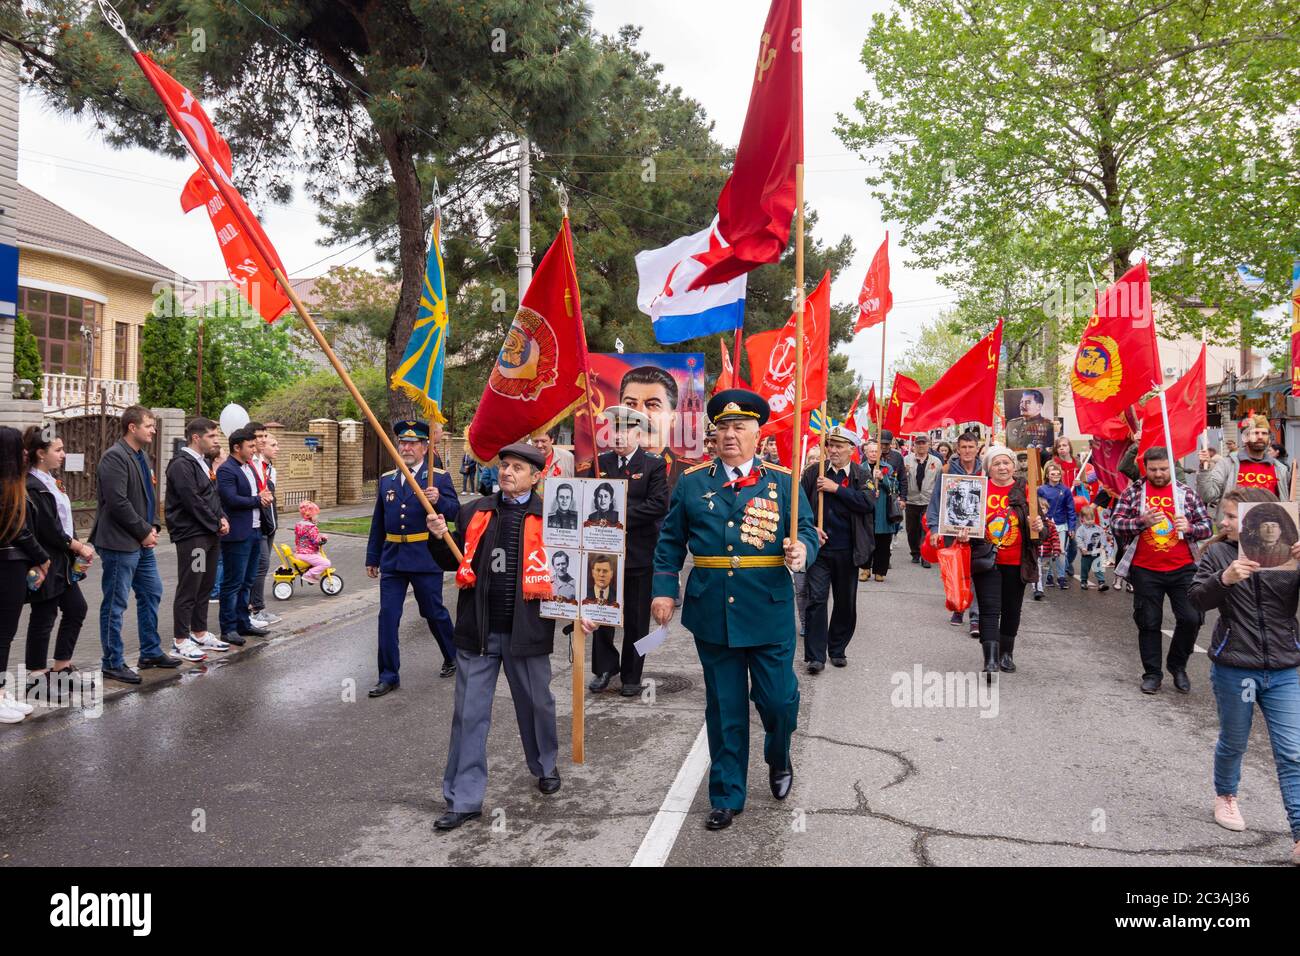 Anapa, Russia - May 9, 2019: Communists walk down the street at the victory parade in Anapa Stock Photo